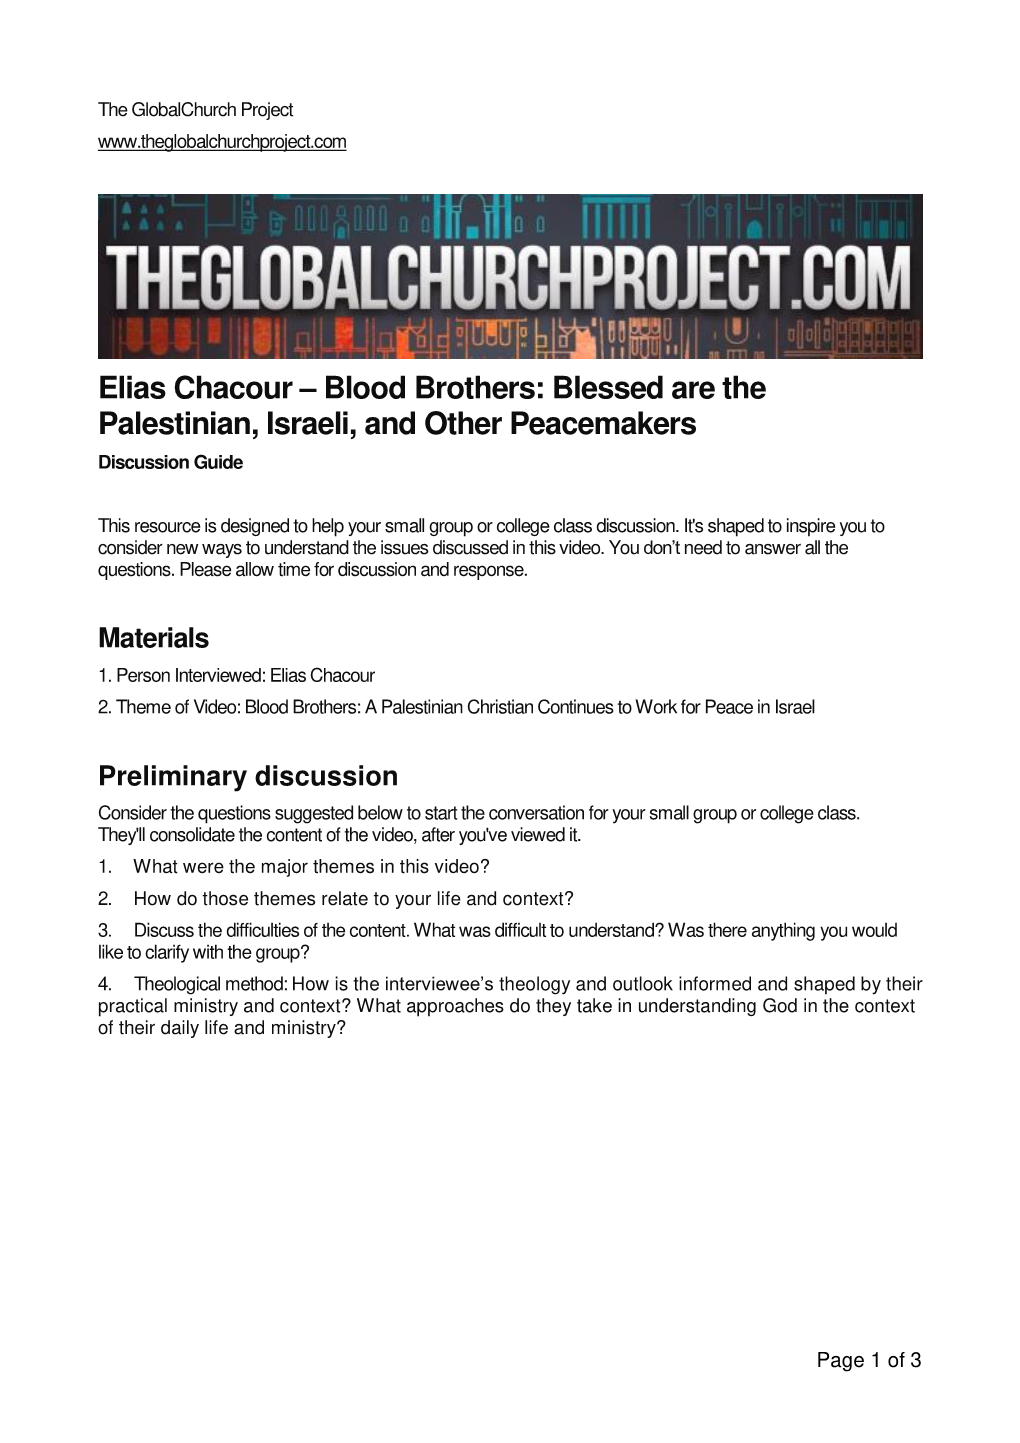 Elias Chacour – Blood Brothers: Blessed Are the Palestinian, Israeli, and Other Peacemakers Discussion Guide